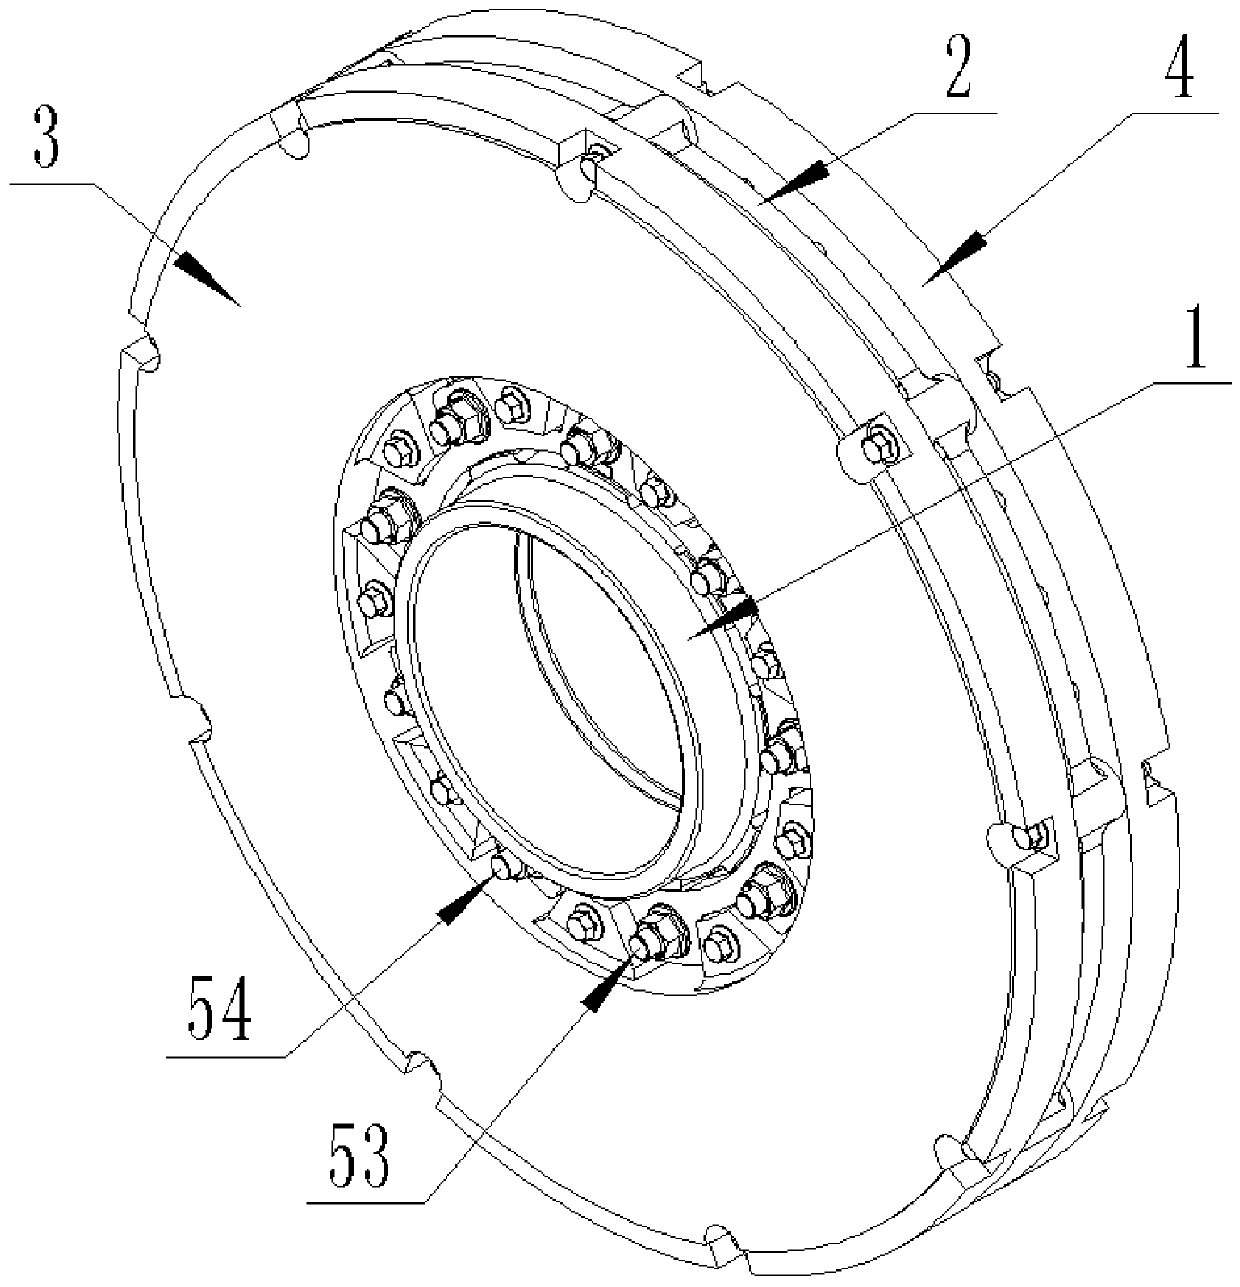 Carbon-ceramic axle-mounted brake disc suitable for high speed trains